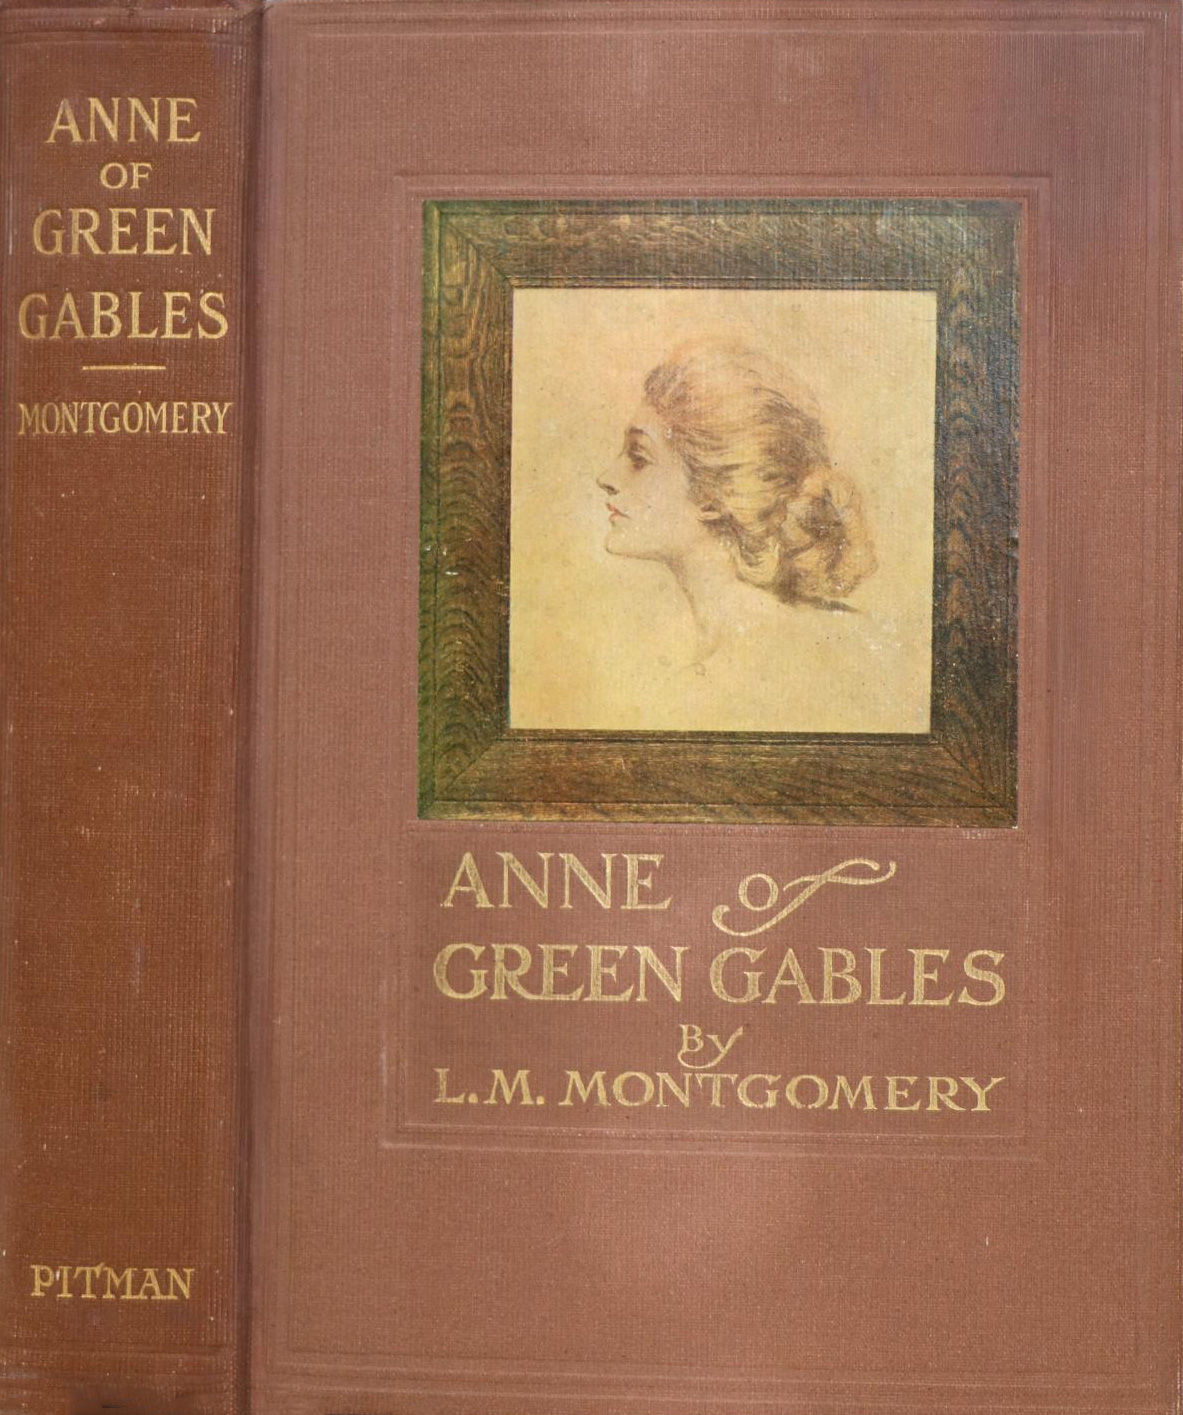 Ru mixture vertical The Project Gutenberg eBook of Anne of Green Gables, by Lucy Maud Montgomery